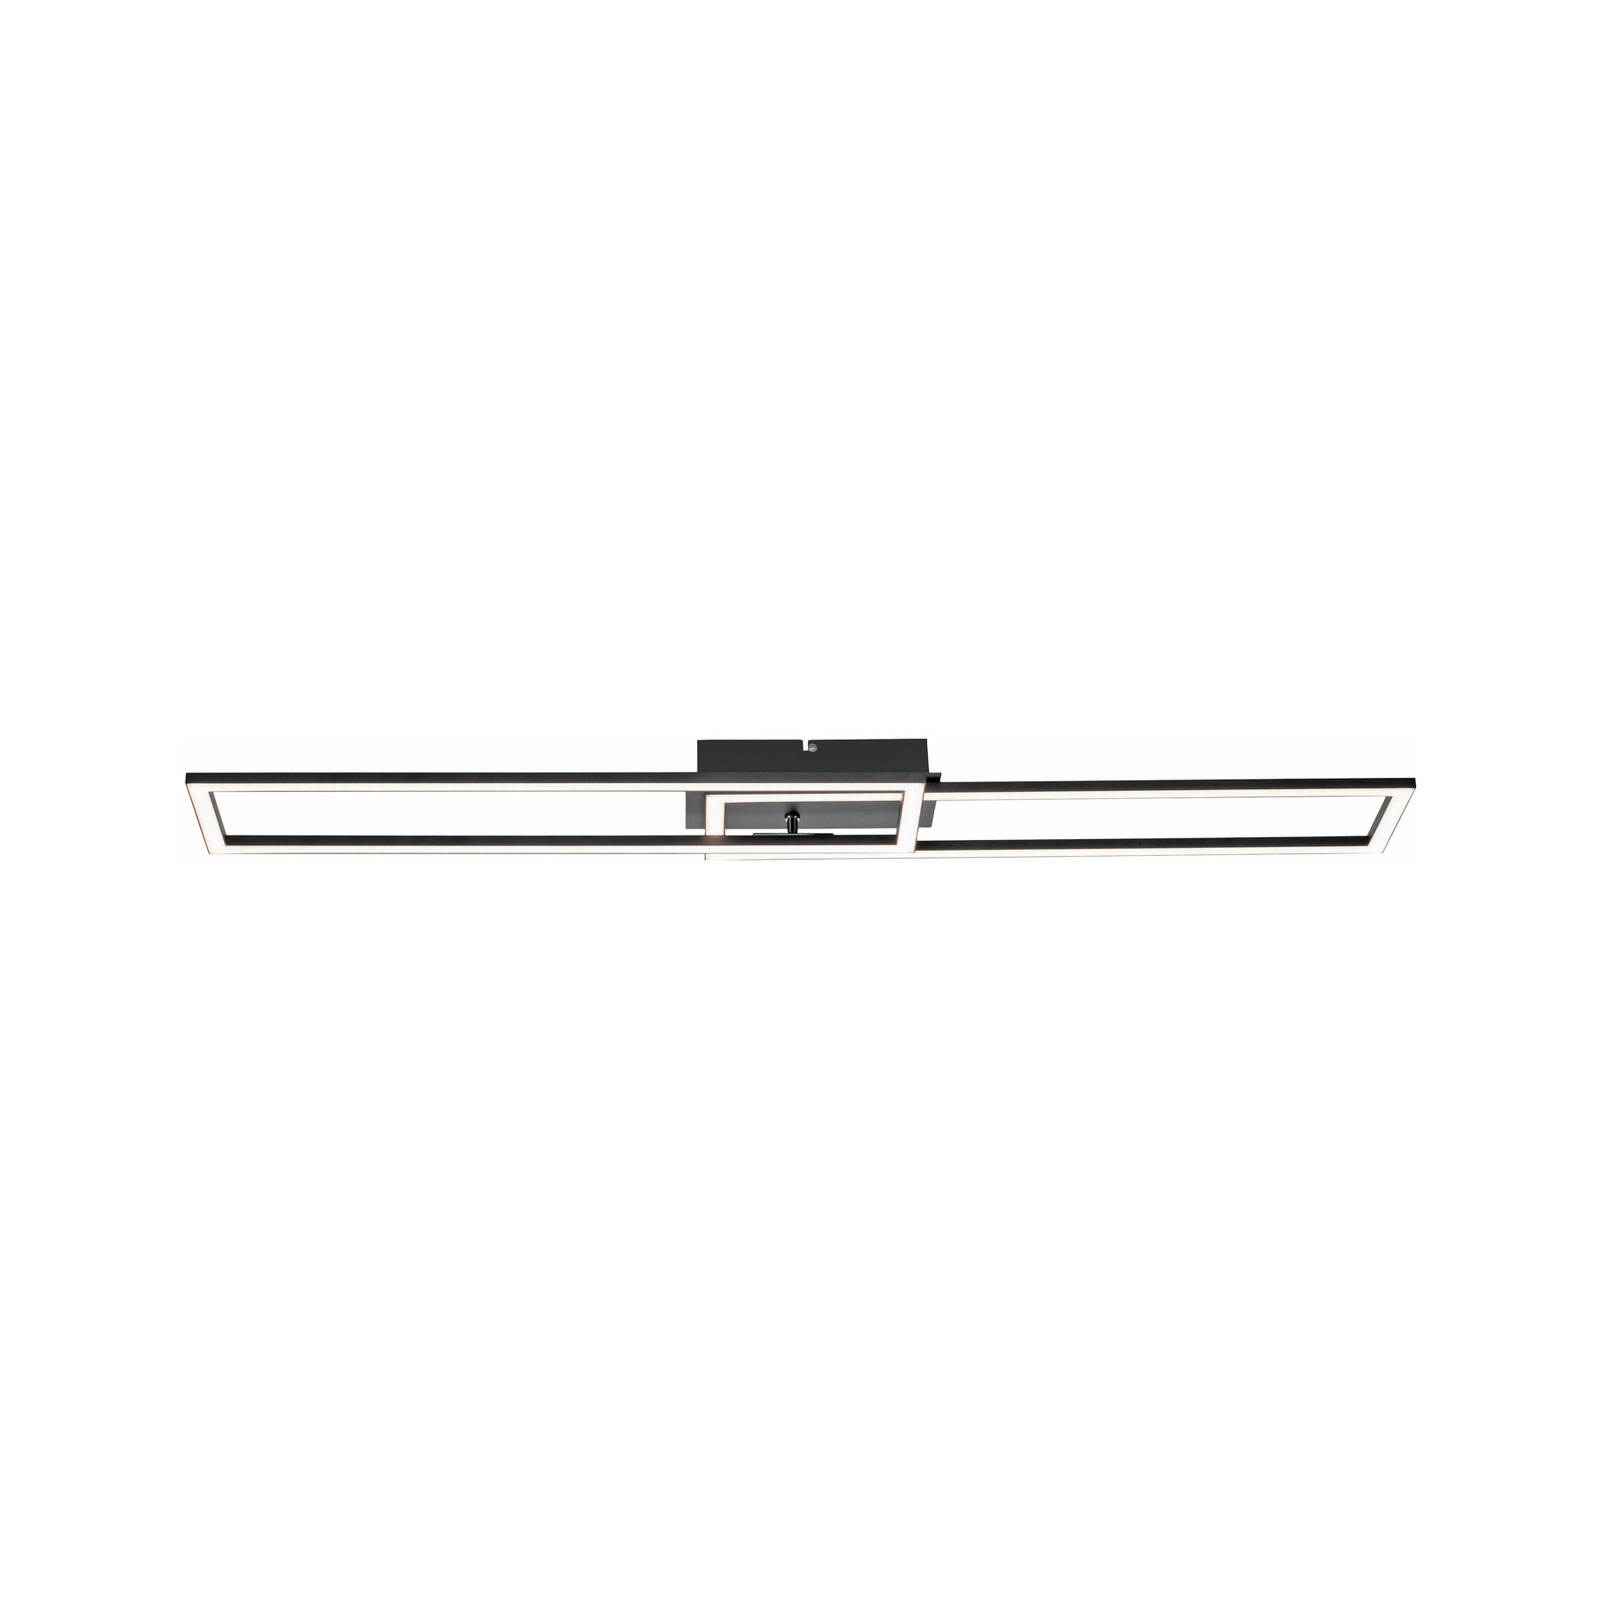 Dime LED ceiling light Iven, dimmable, black, 101.6x19.8cm